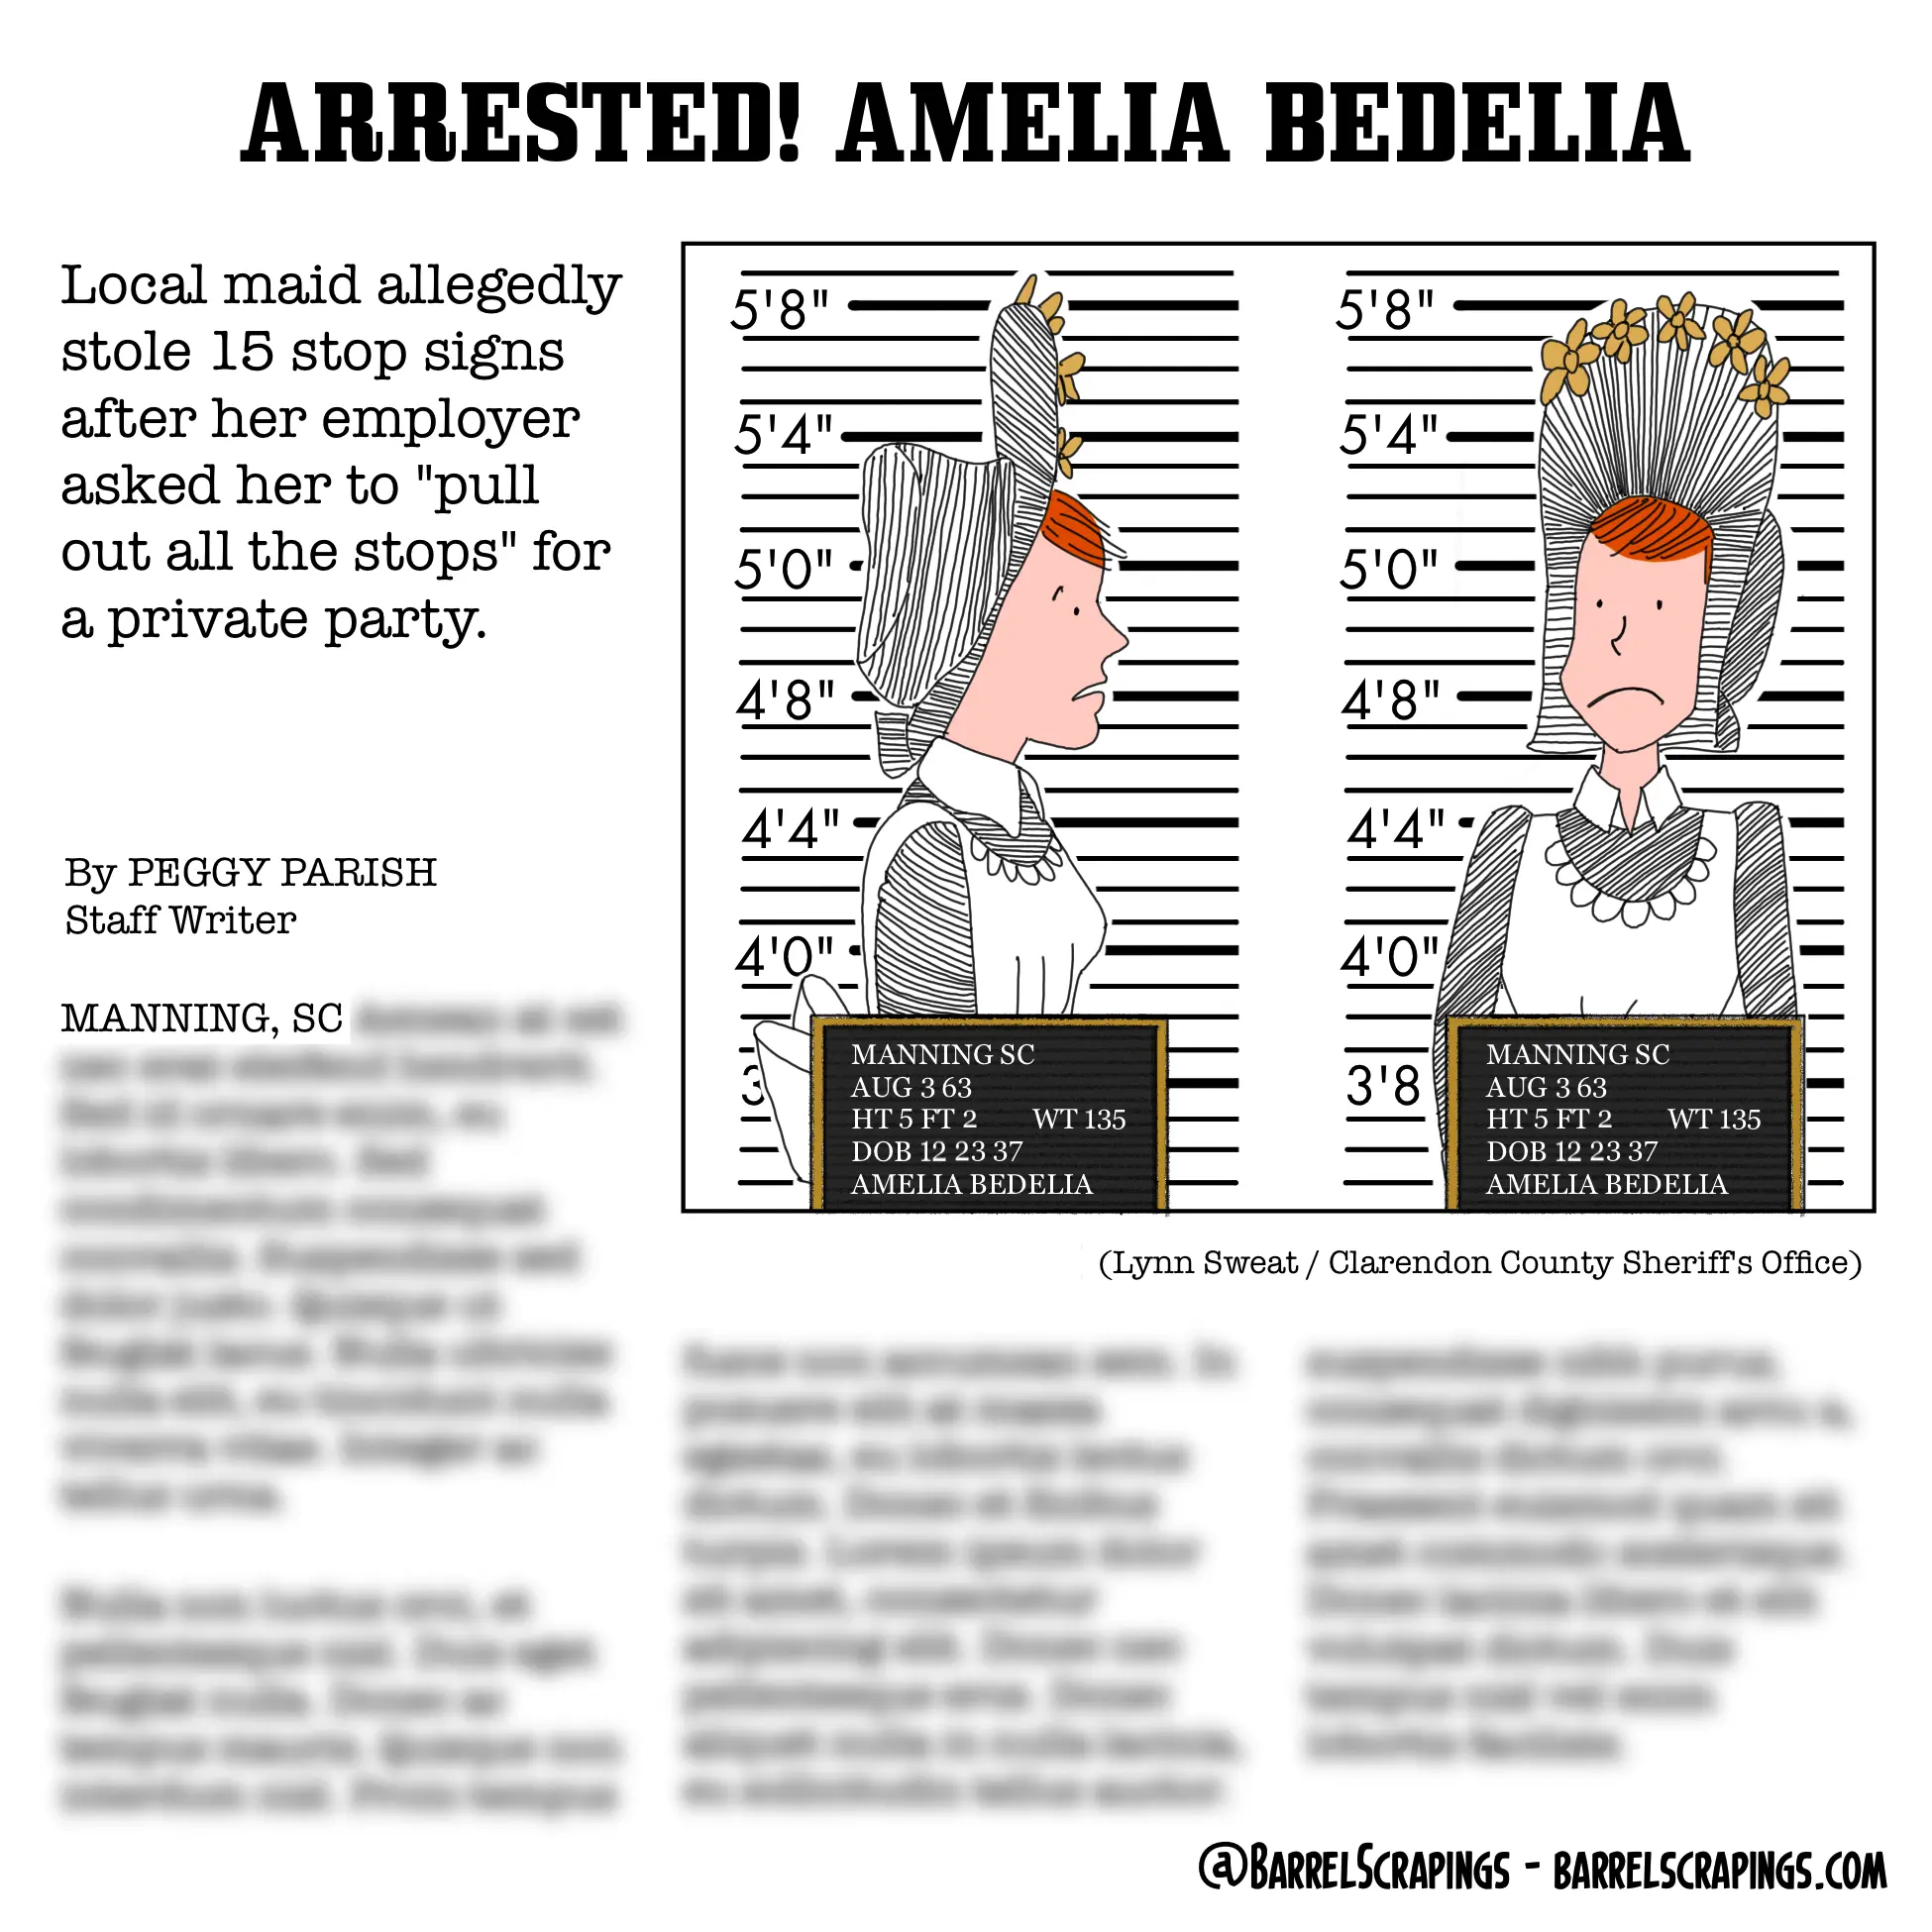 Faux newspaper. Headline: “Arrested! Amelia Bedelia”. Subheading: “Local maid allegedly stole 15 stop signs after her employer asked her to ‘pull out all the stops’ for a private party.” Mug shot of Amelia Bedelia.